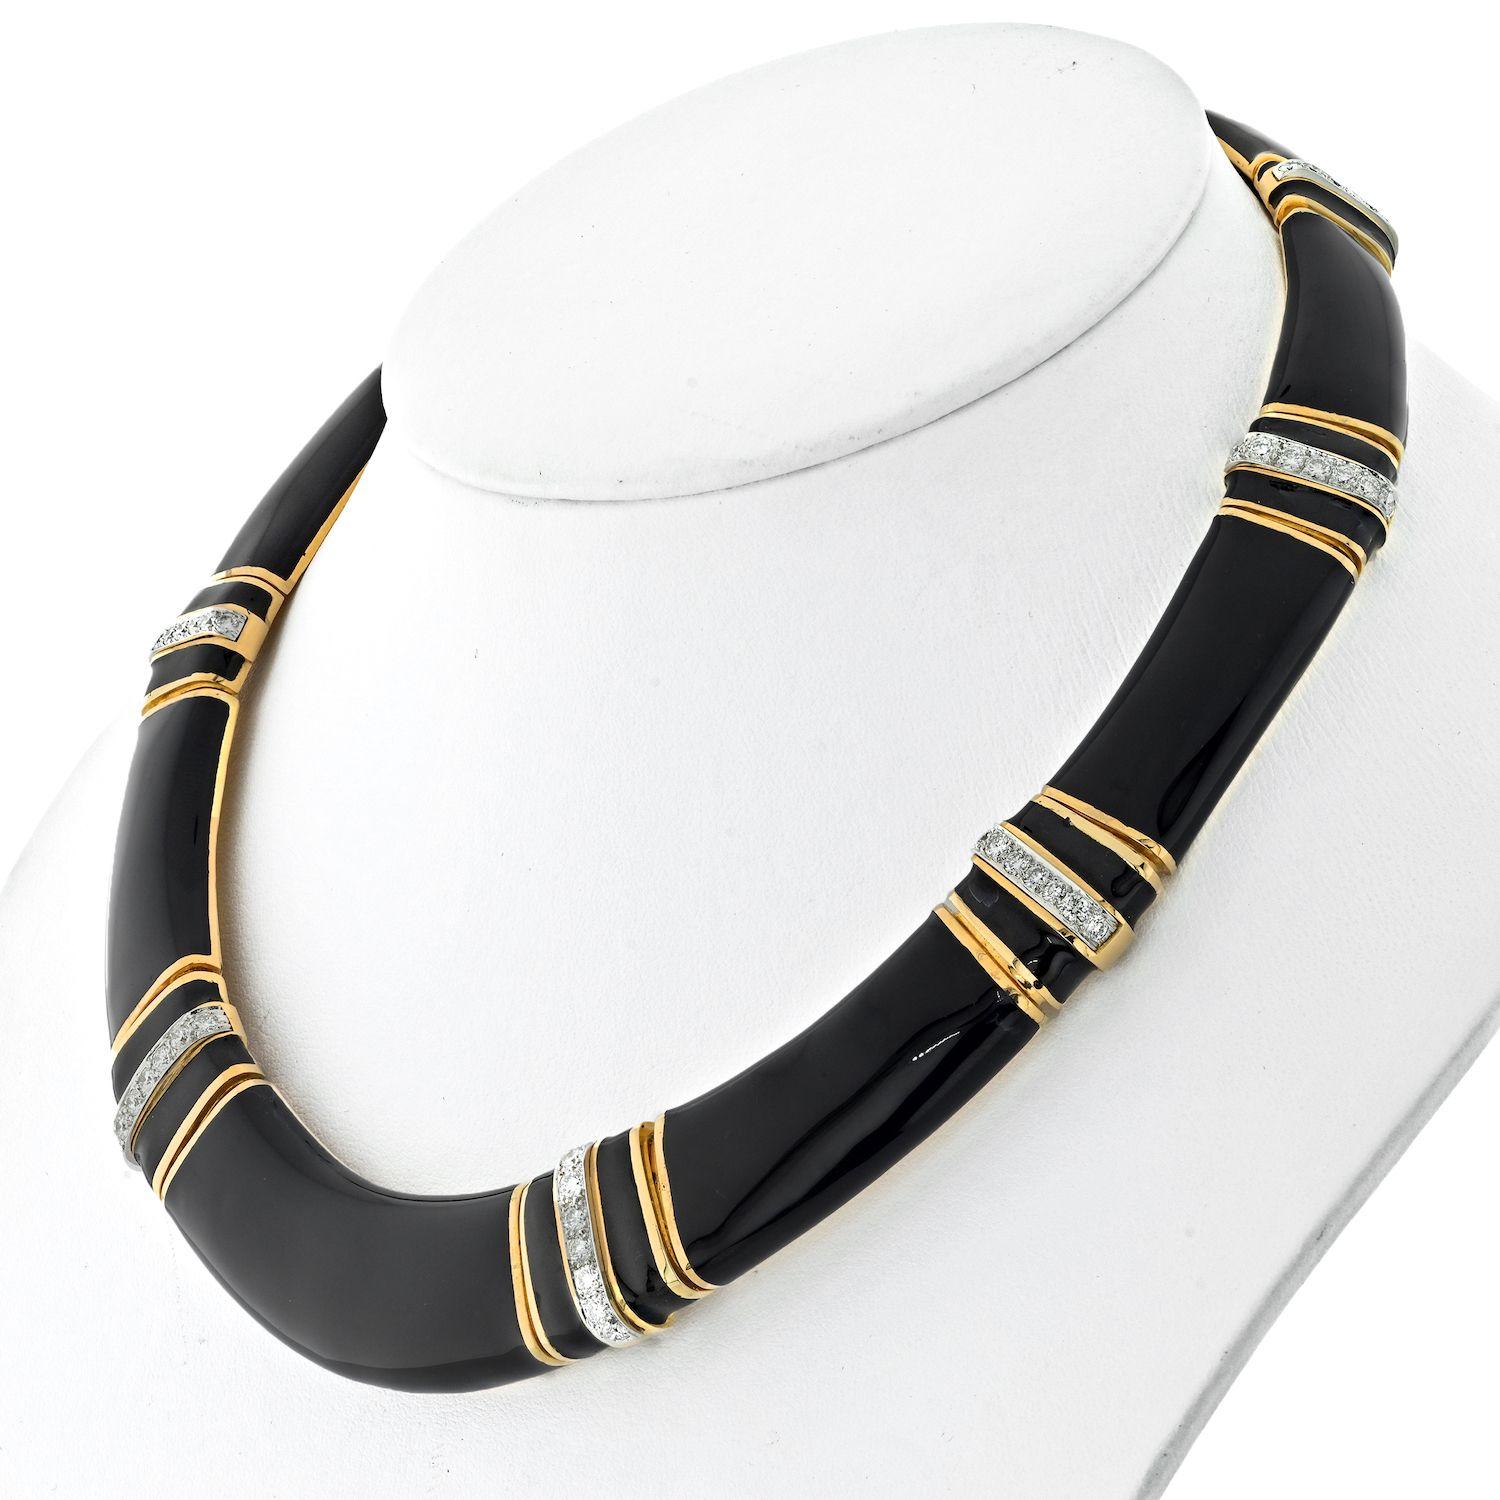 The David Webb 18K Yellow Gold Black Enamel Collar Necklace is a stunning piece of jewelry that showcases the brand's signature style and attention to detail. Crafted in 18K yellow gold, this collar necklace features black enamel, creating a